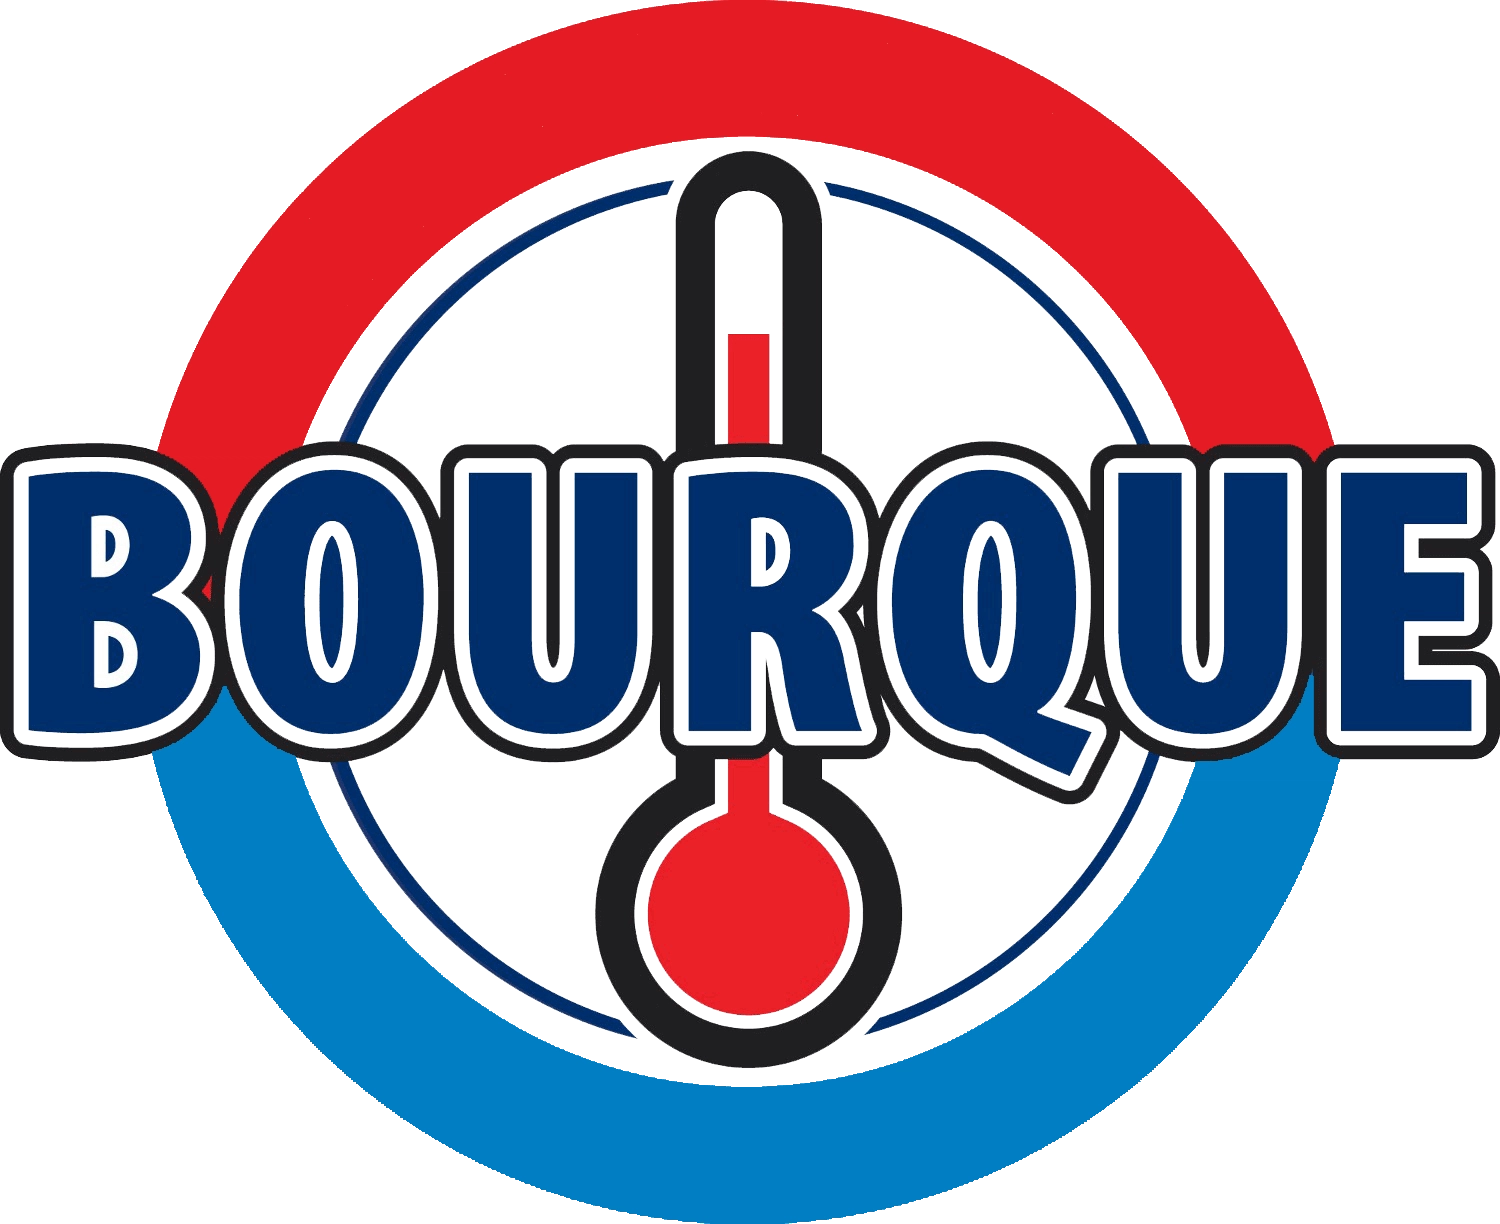 Bourque Heating & Cooling Logo